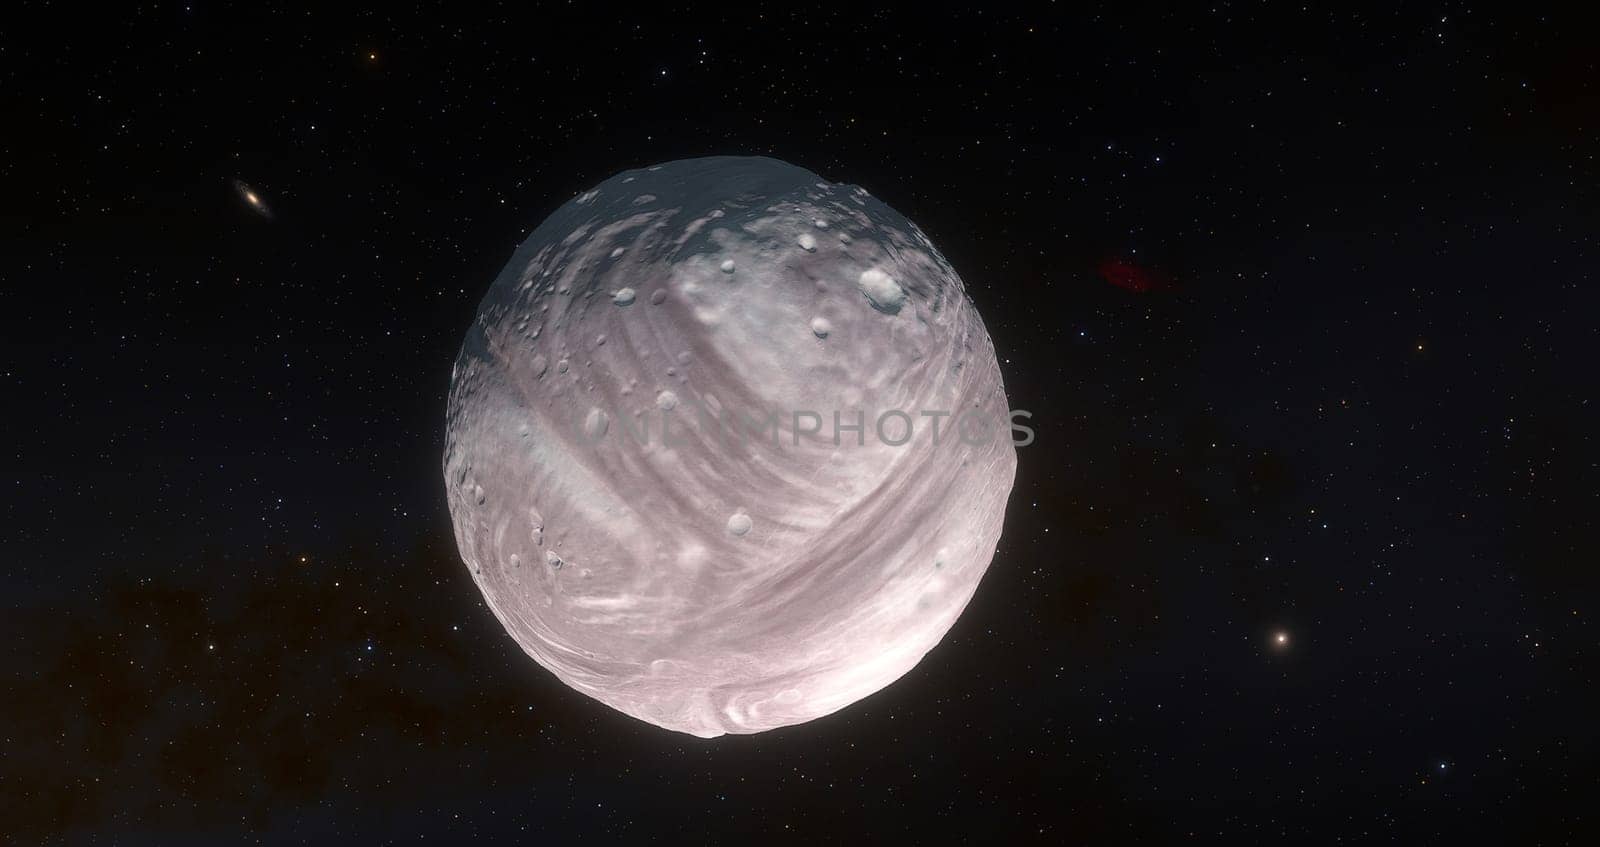 Miranda is one of the moons orbiting the planet Uranus in the Solar System. It is classified as frigid airless microaquaria. Discovery date 1948.